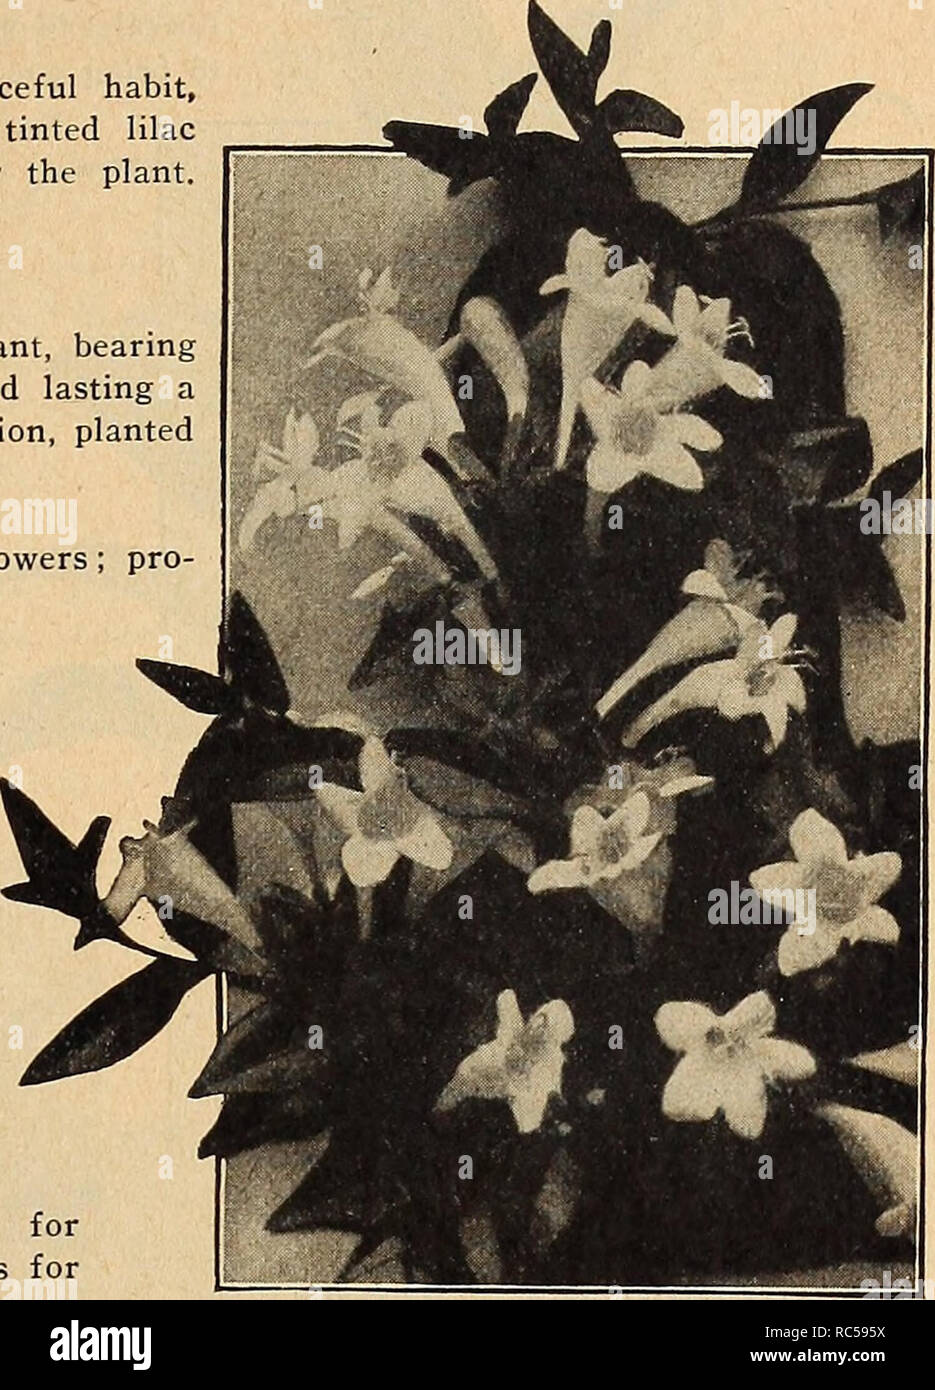 . Dreer's mid-summer list 1919. Flowers Seeds Catalogs; Fruit Seeds Catalogs; Vegetables Seeds Catalogs; Nurseries (Horticulture) Catalogs; Gardening Equipment and supplies Catalogs. SELECT LIST OF SEASONABLE Garden and House Plants ABELIA Chinensis Grandiflora. A choice, small, hardy Shrub of graceful habit, producing through the entire summer and fall months white tinted lilac heather-like flowers in such abundance as to completely cover the plant. 50 cts. each. AGAPANTHUS Umbellatus (Blue Lily of the Nile). A splendid ornamental plant, bearing clusters of bright, blue flowers on 3-foot long Stock Photo